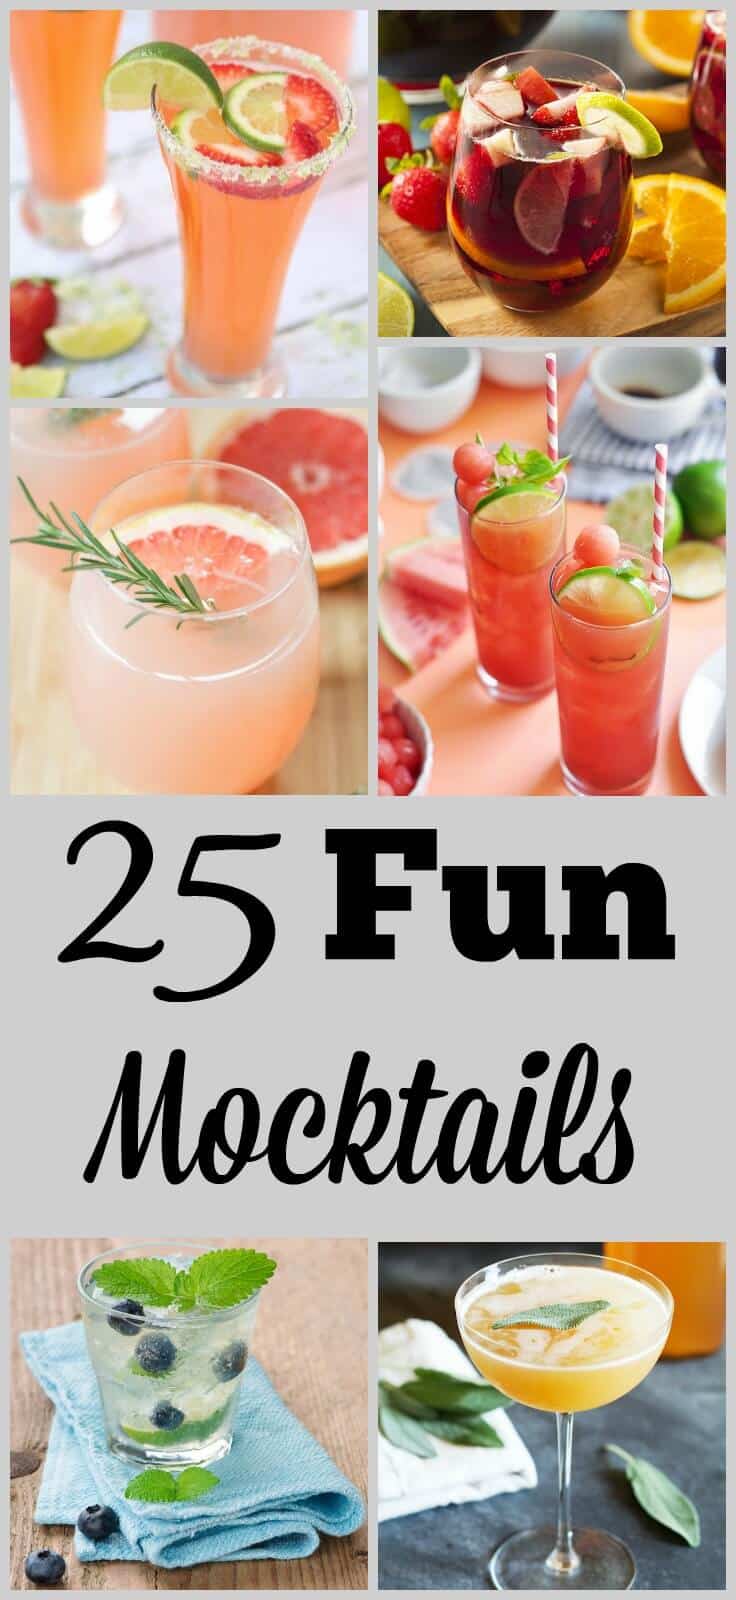 Check out these fun, fruity, fresh mocktails for your next family-friendly gathering!